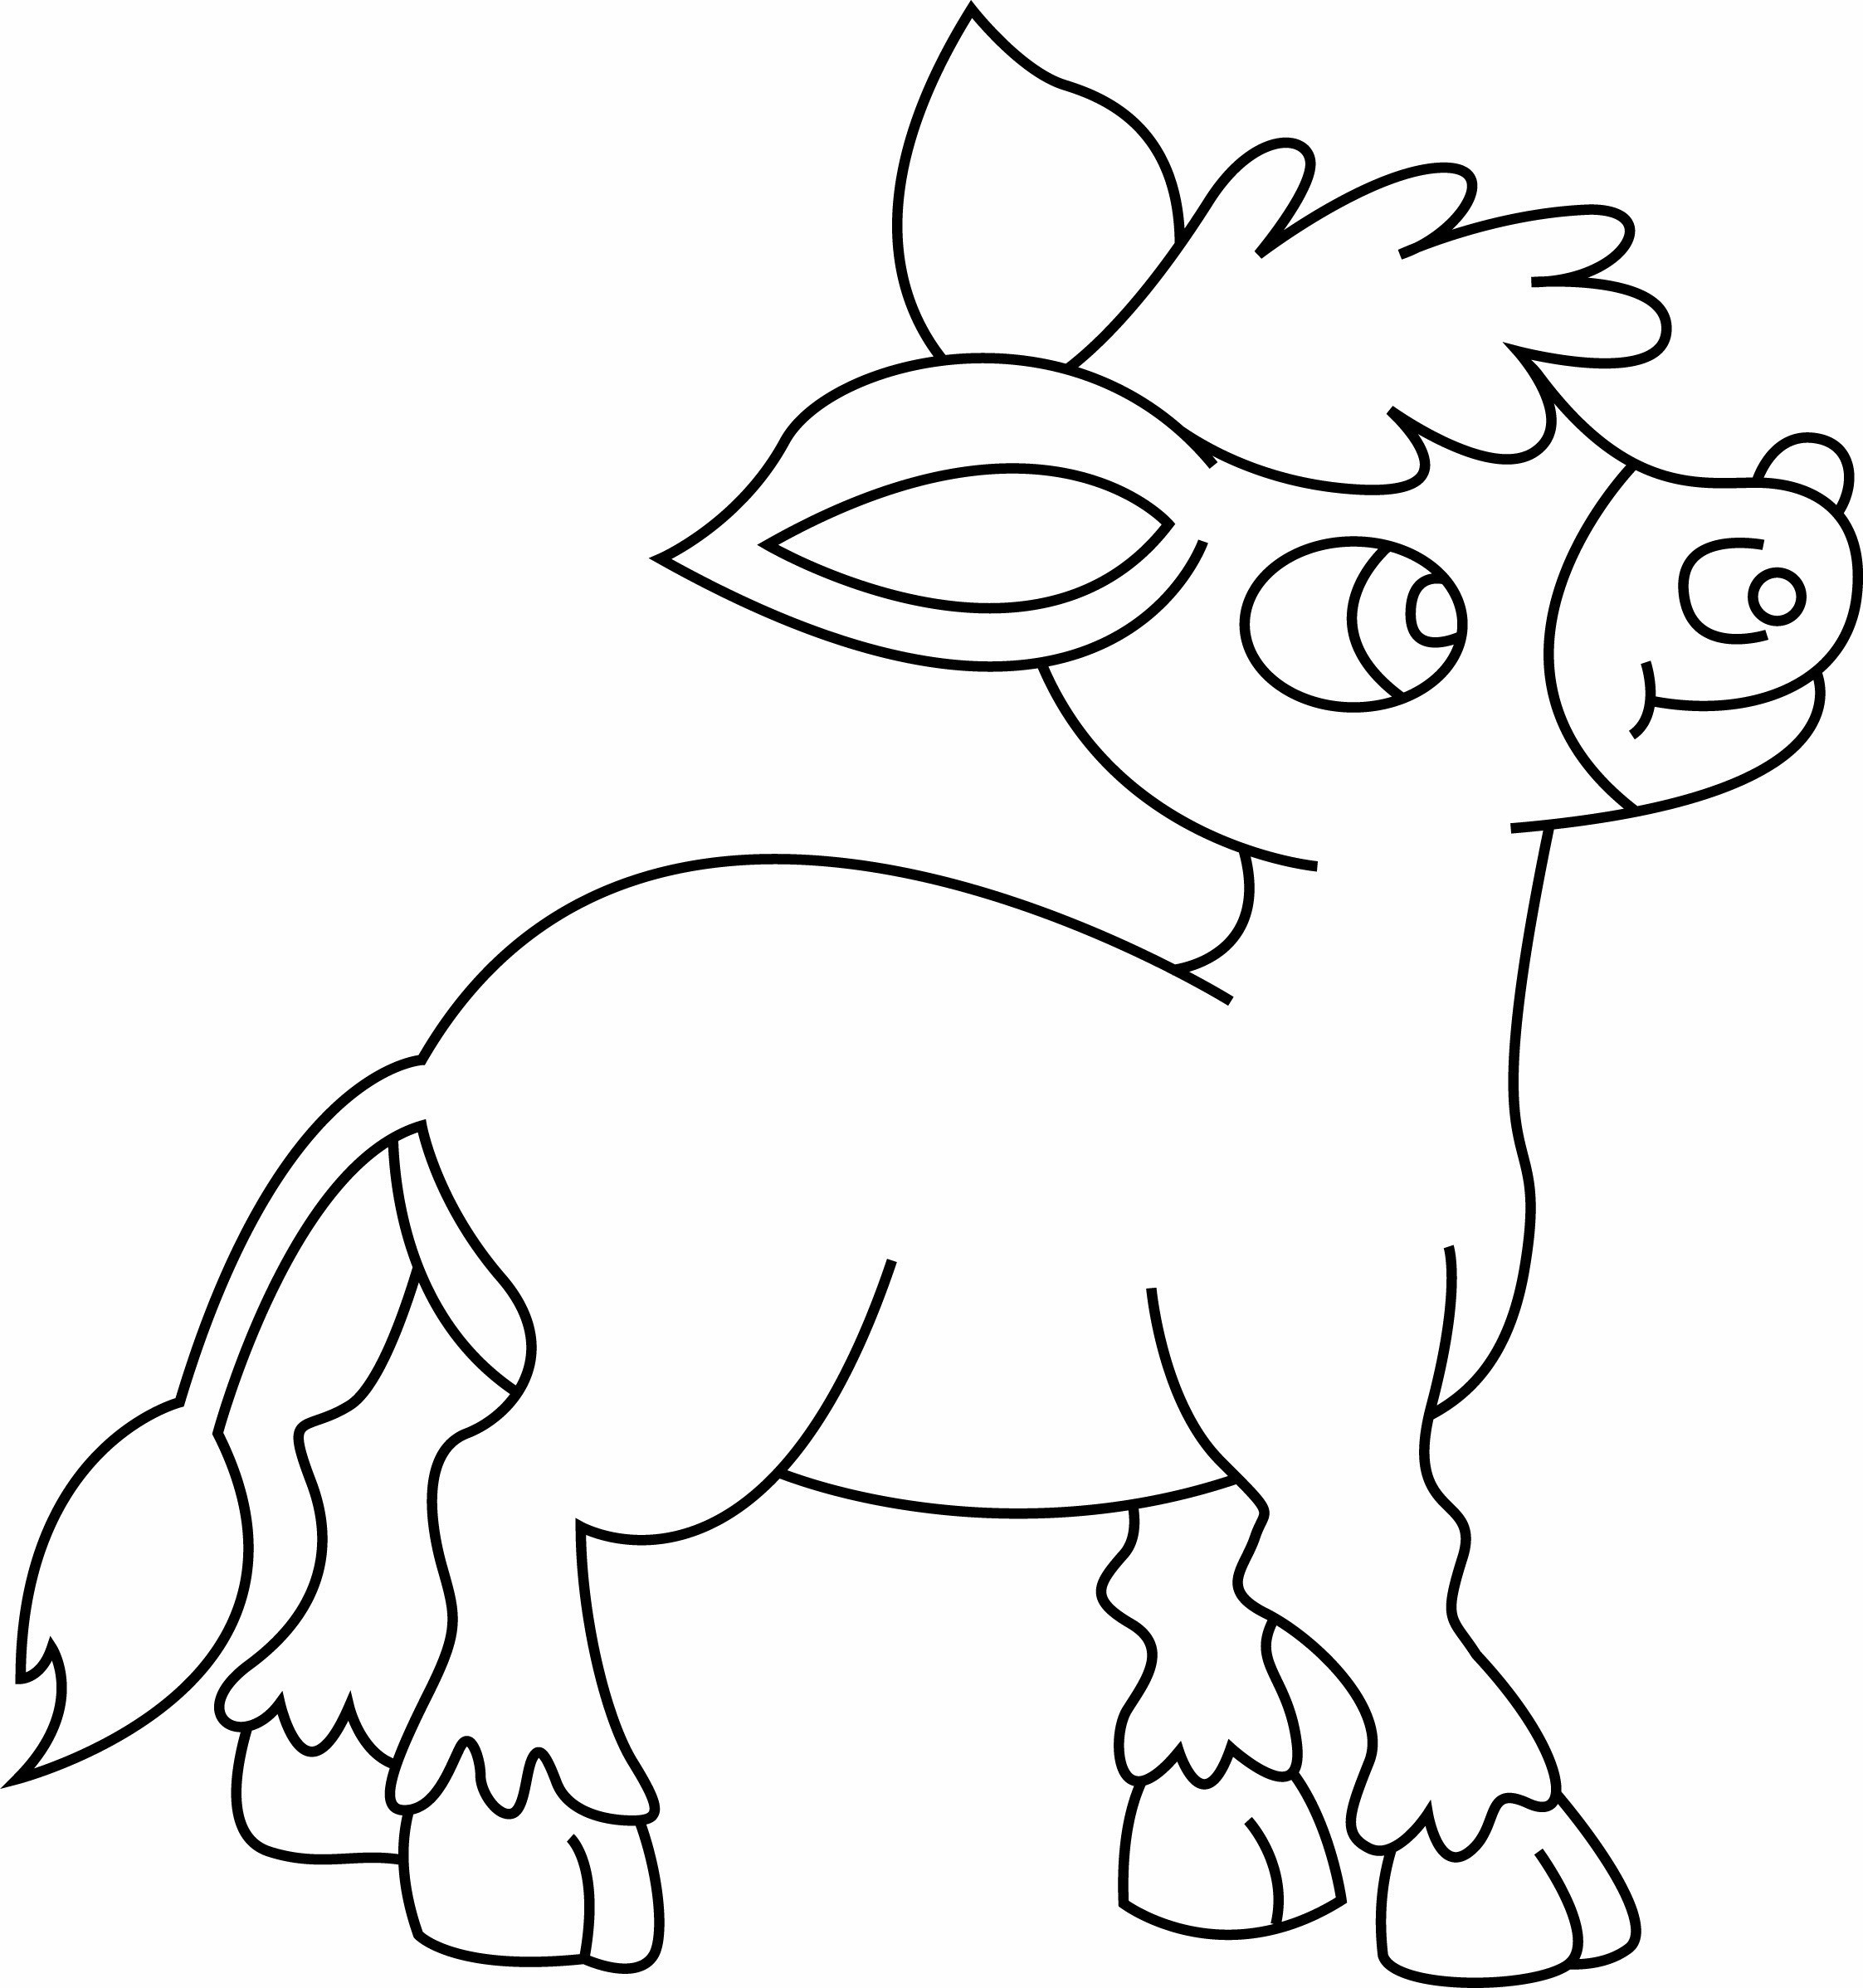 Coloriage - Animaux : Ane 01 - 10 Doigts concernant Ane Dessin 